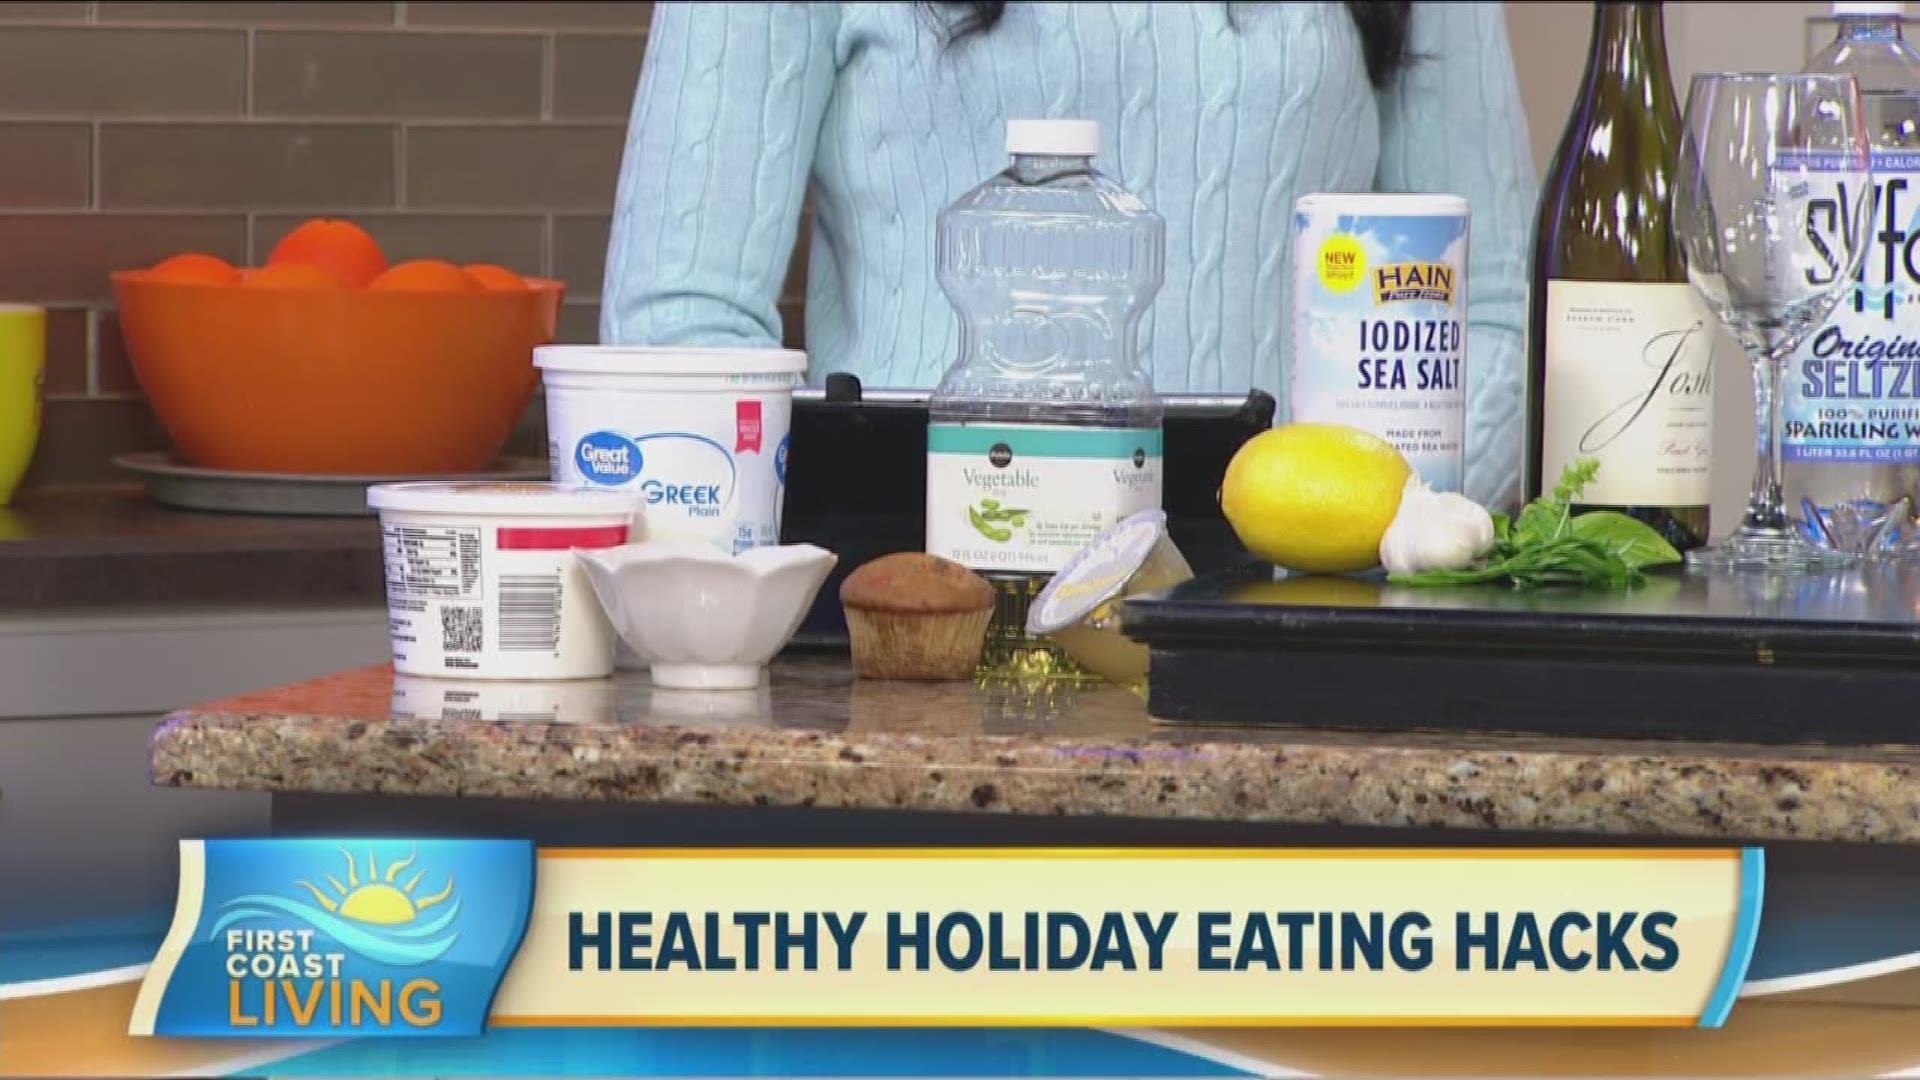 Dr. Lauri Wright is the Char of the UNF Department of Nutrition and Dietetics and she has some healthy holiday eating hacks that will help you along the way!